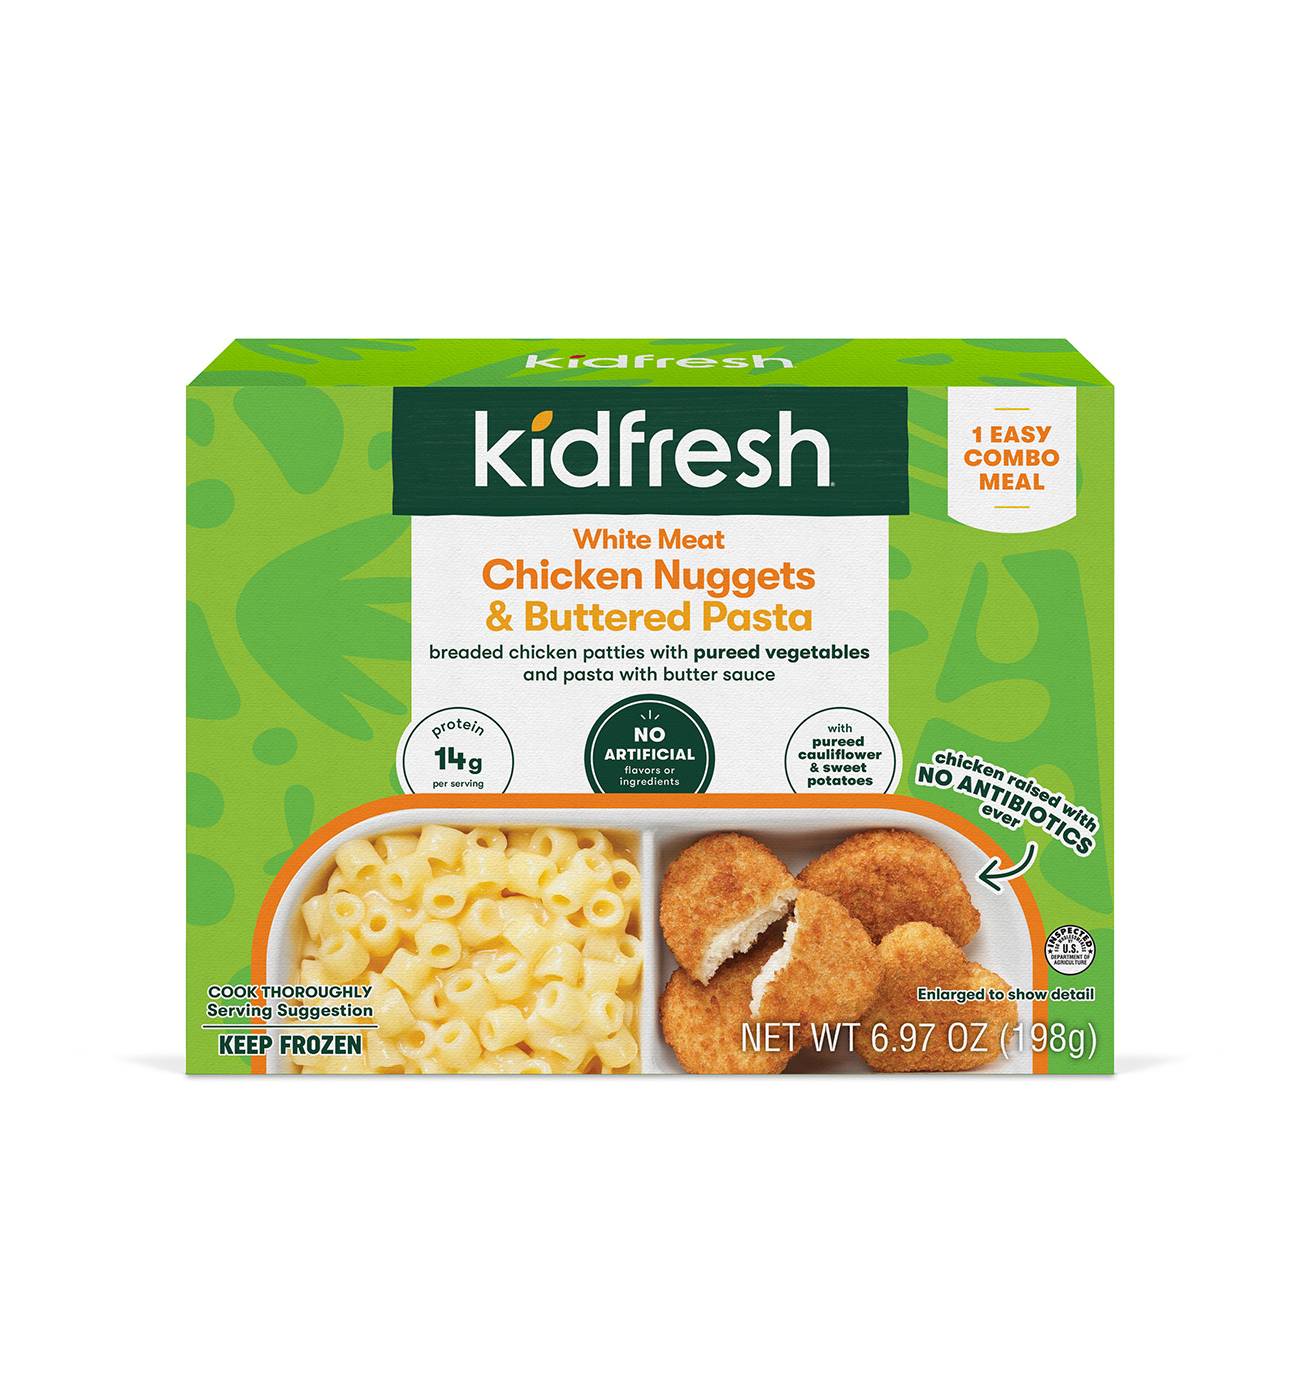 Kidfresh Chicken Nuggets & Buttered Pasta; image 1 of 2